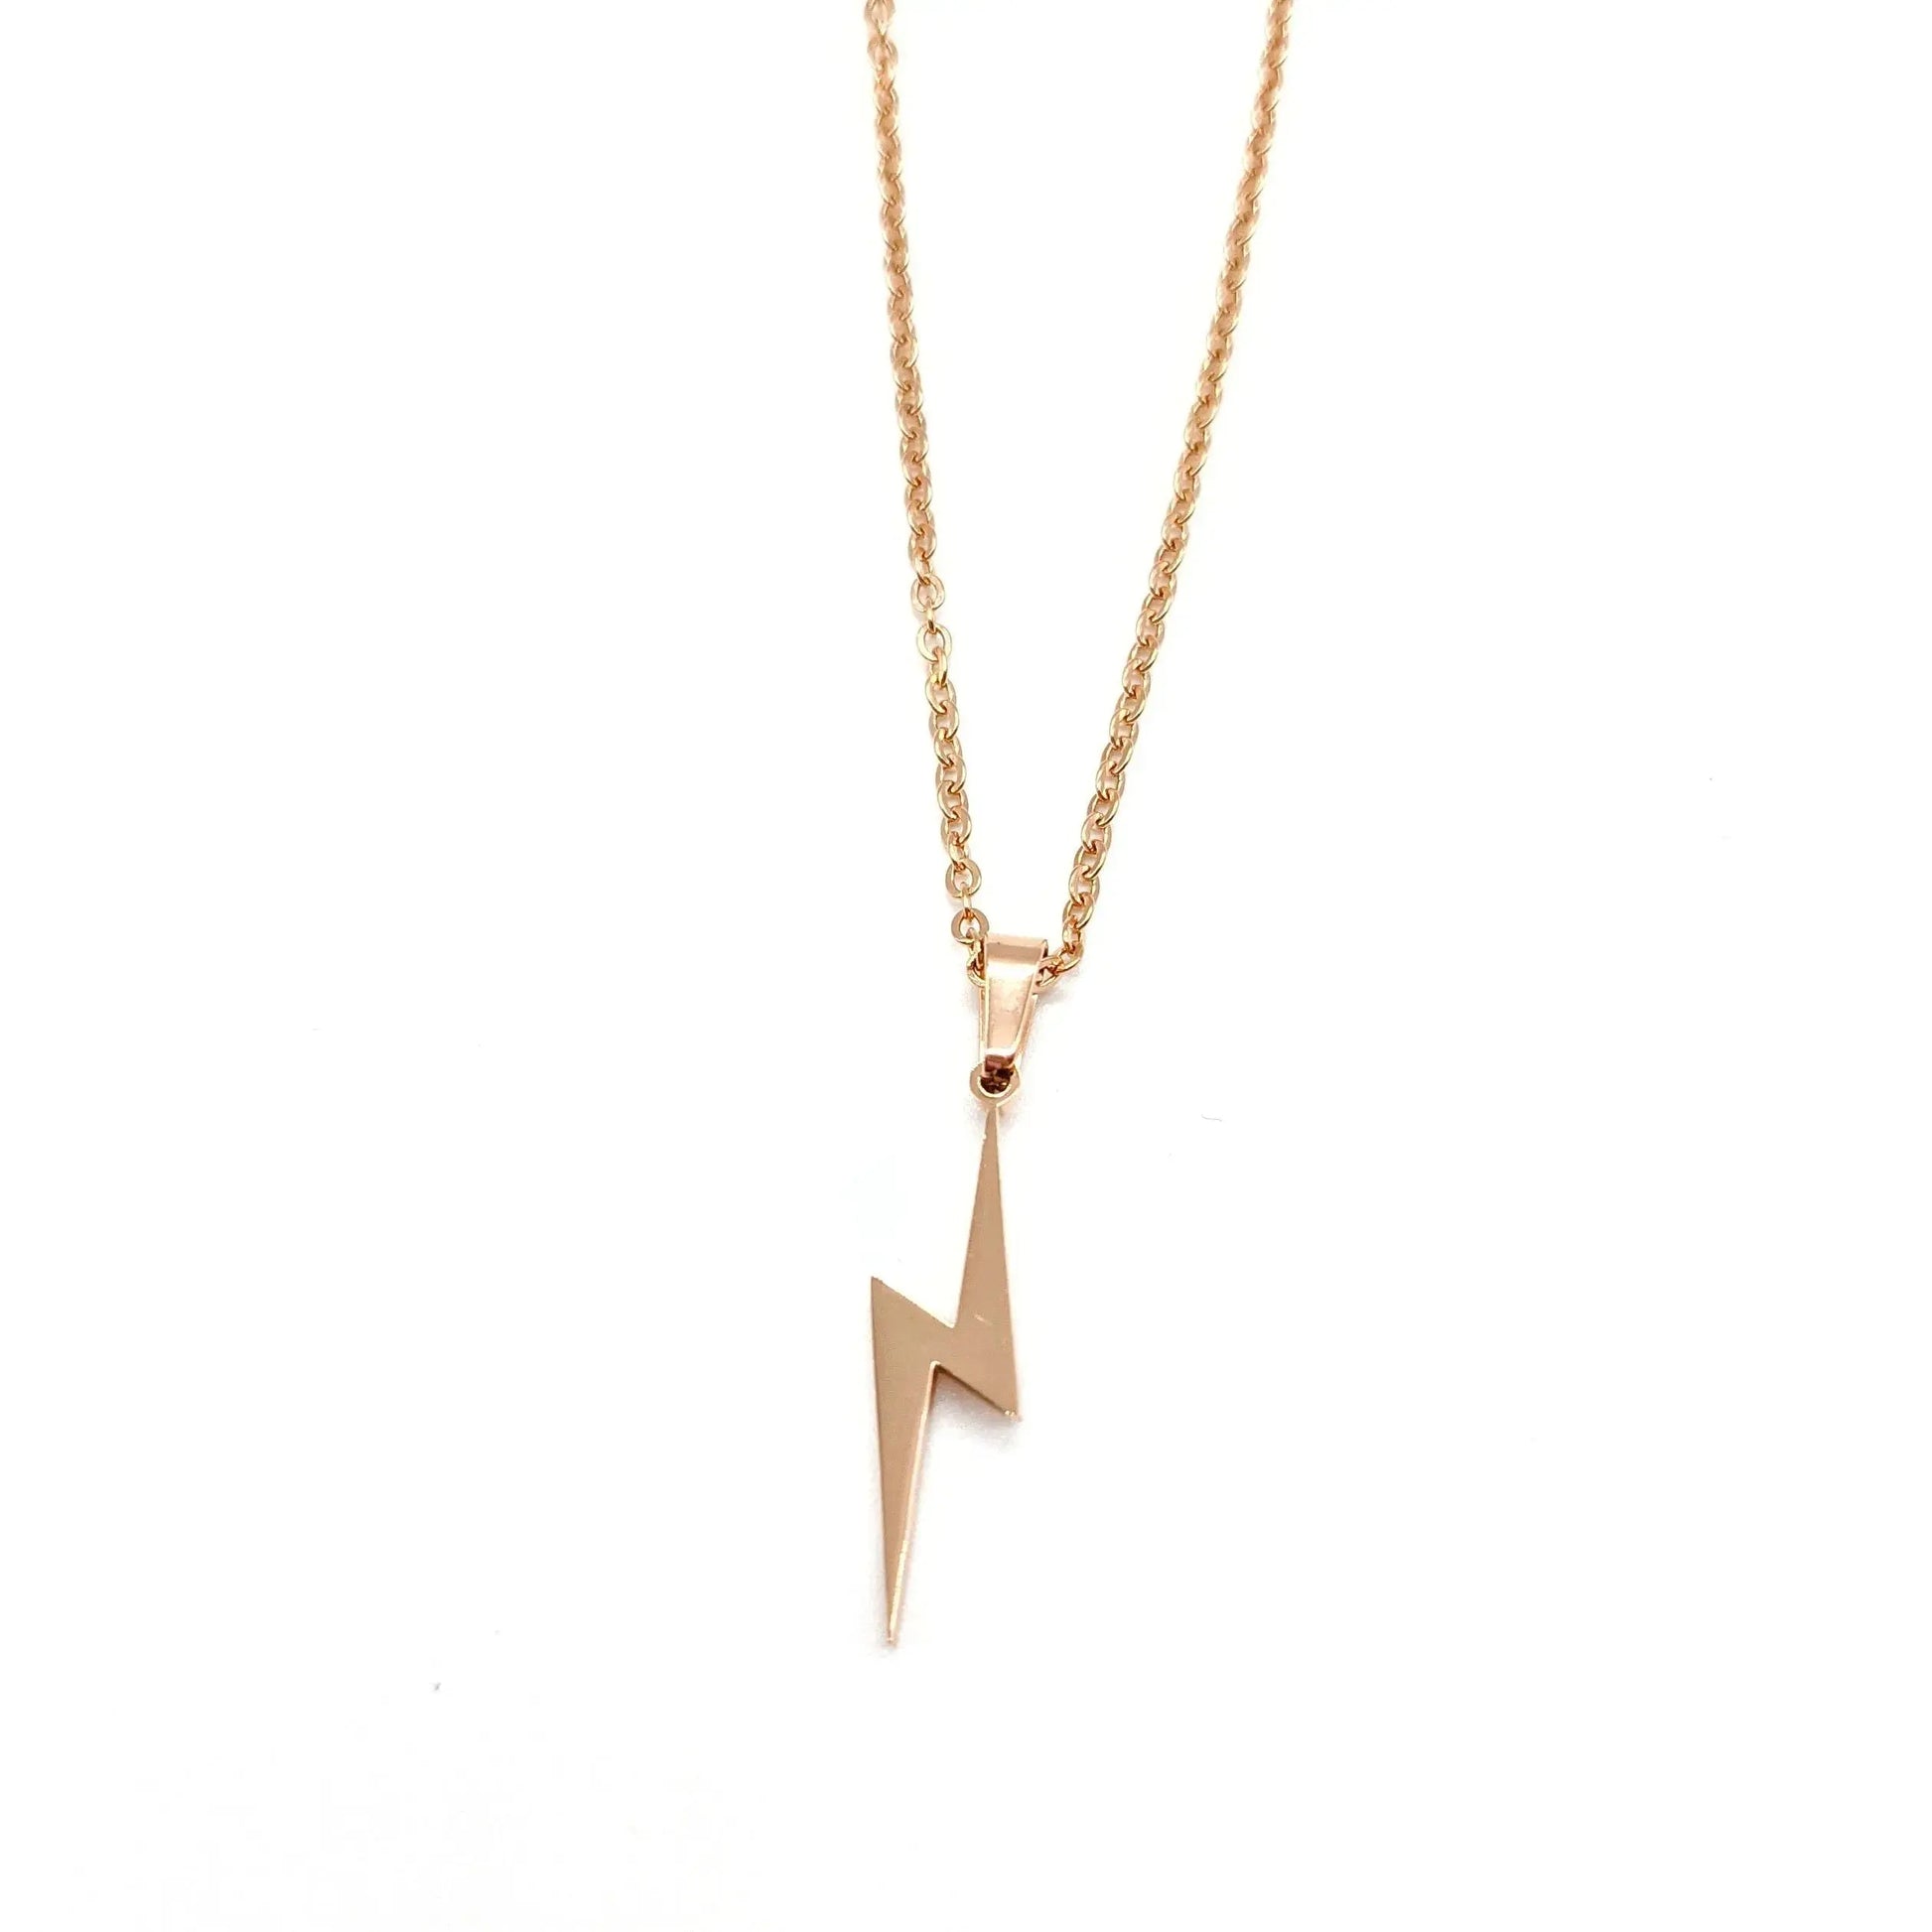 Chunky chain lightning bolt necklace - Trend Tonic